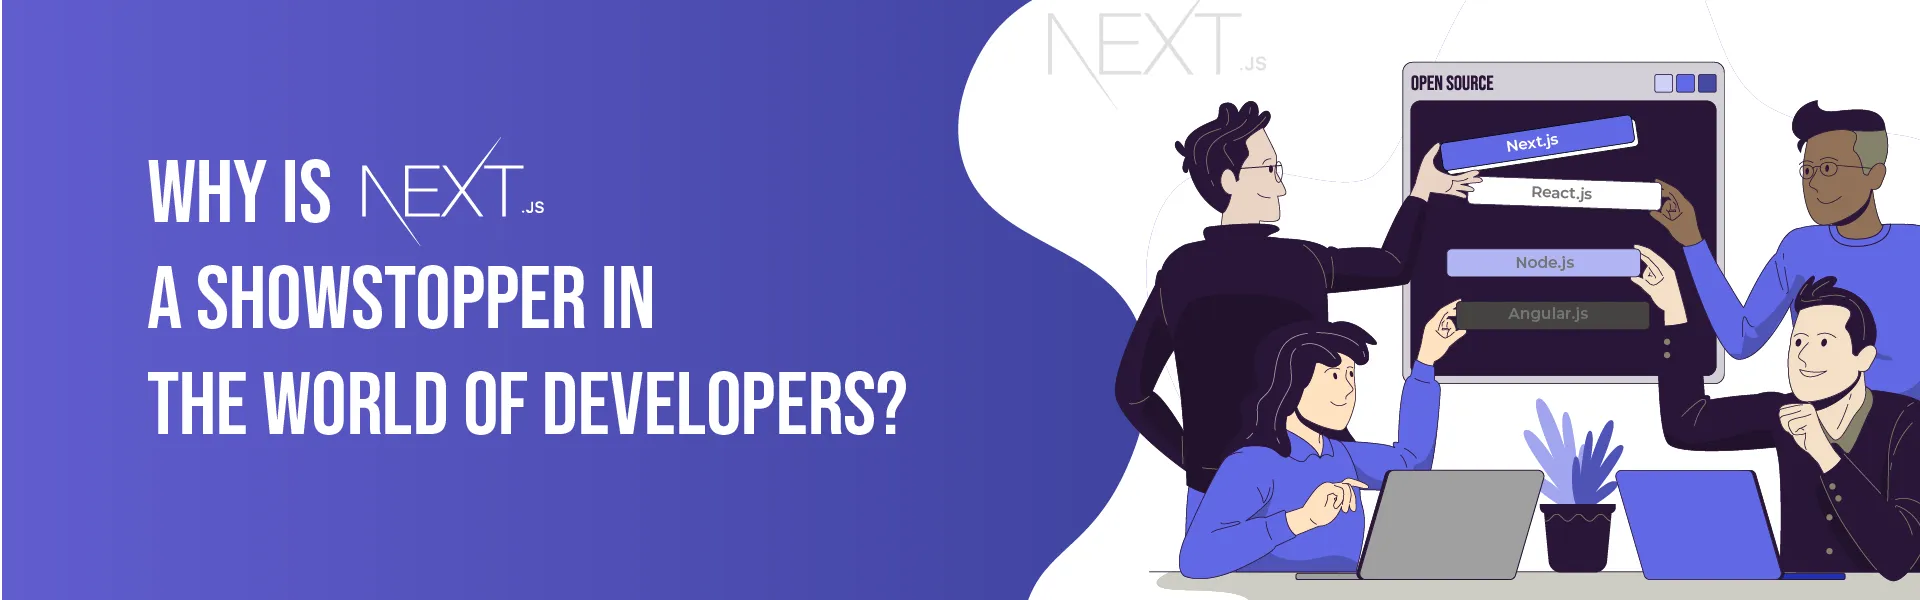 Why is Next.JS a showstopper in the world of Developers?